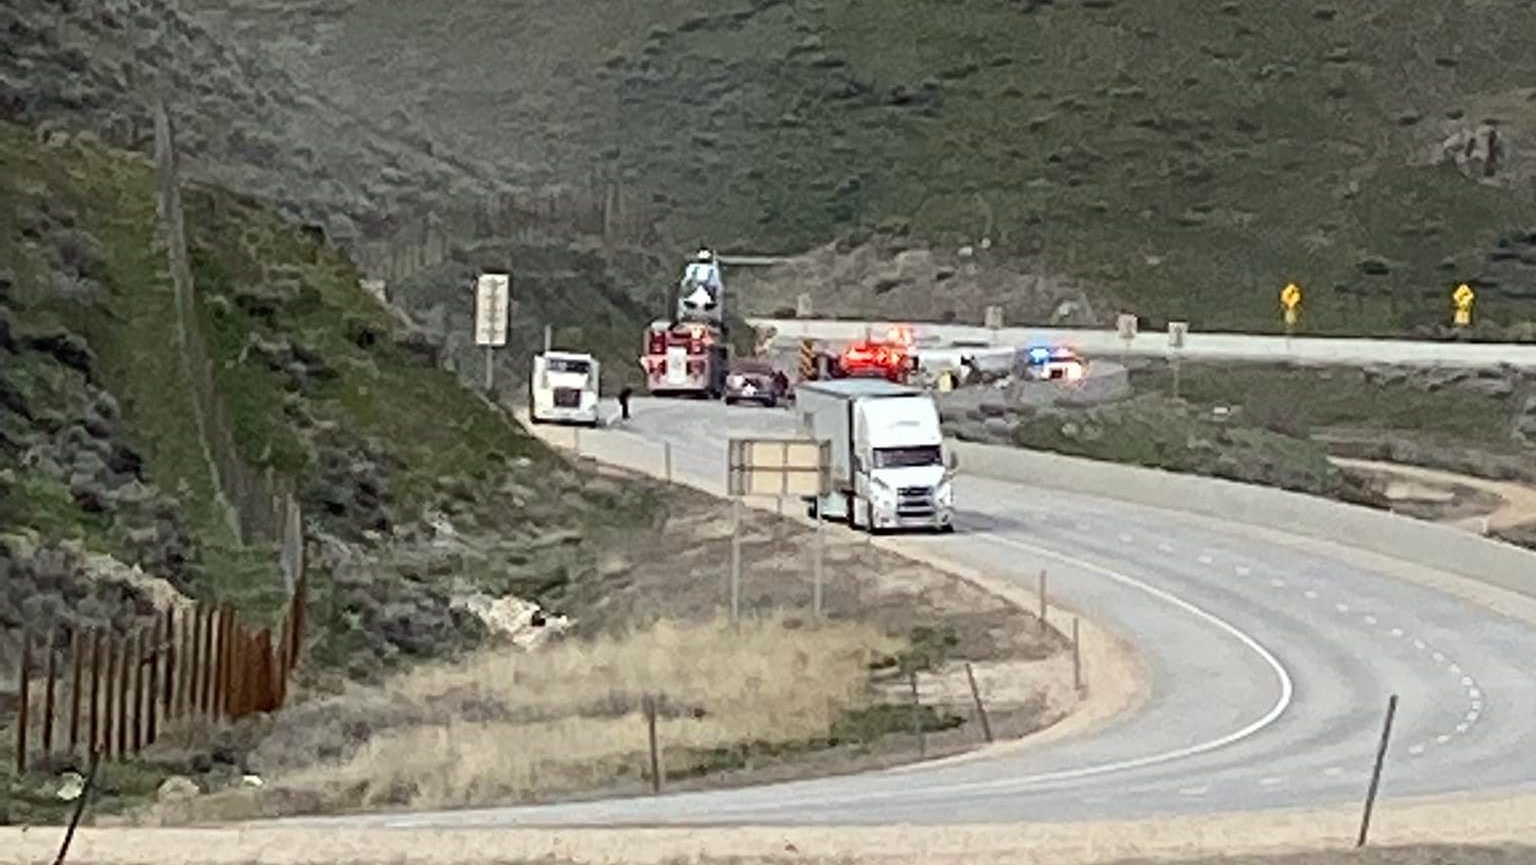 A semi rollover Thursday evening on westbound I-80 forced a short closure of the highway. The drive...